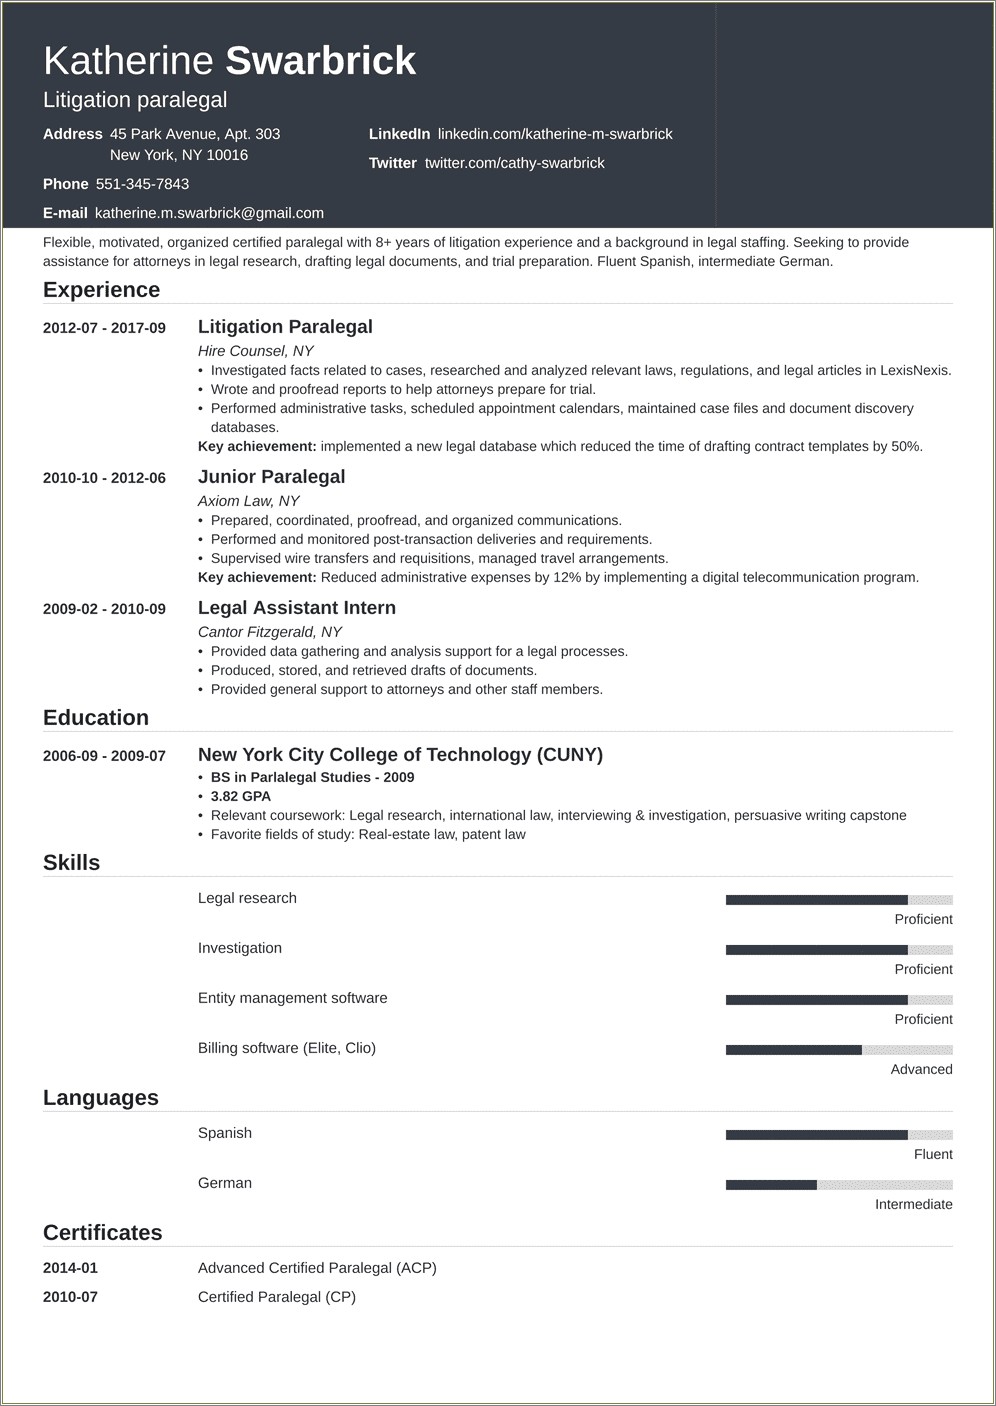 Resume Objective For A Paralegal Job